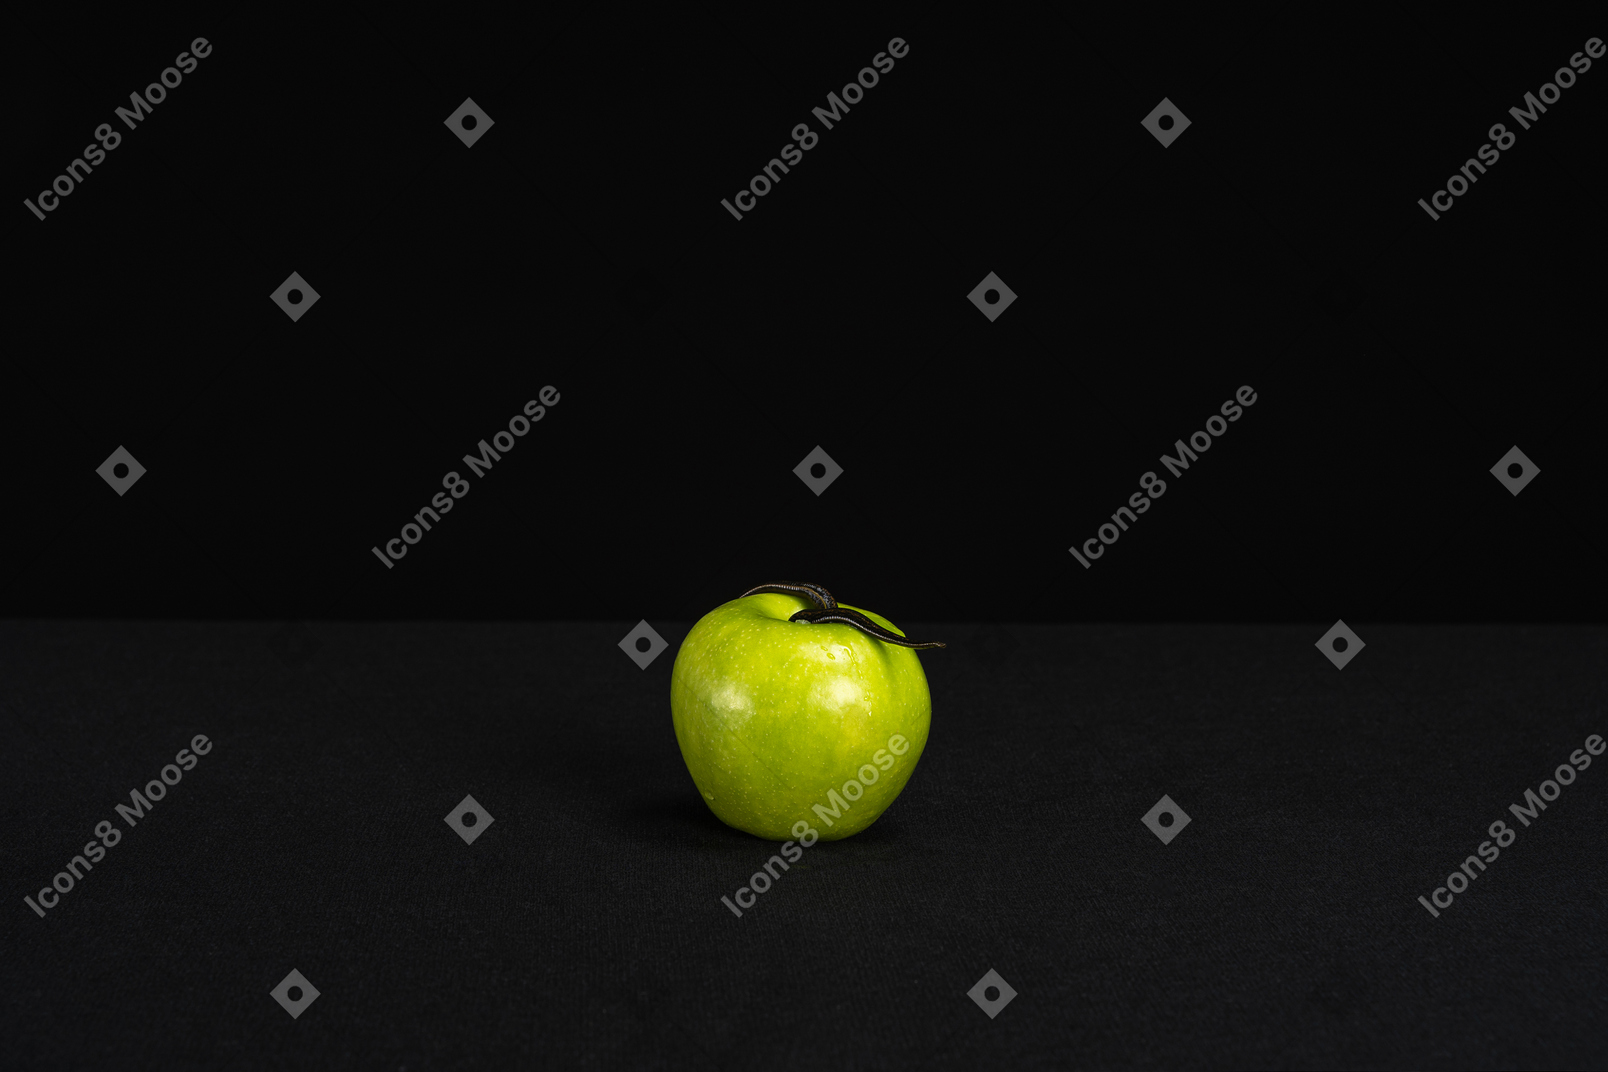 A lonely green apple in black background